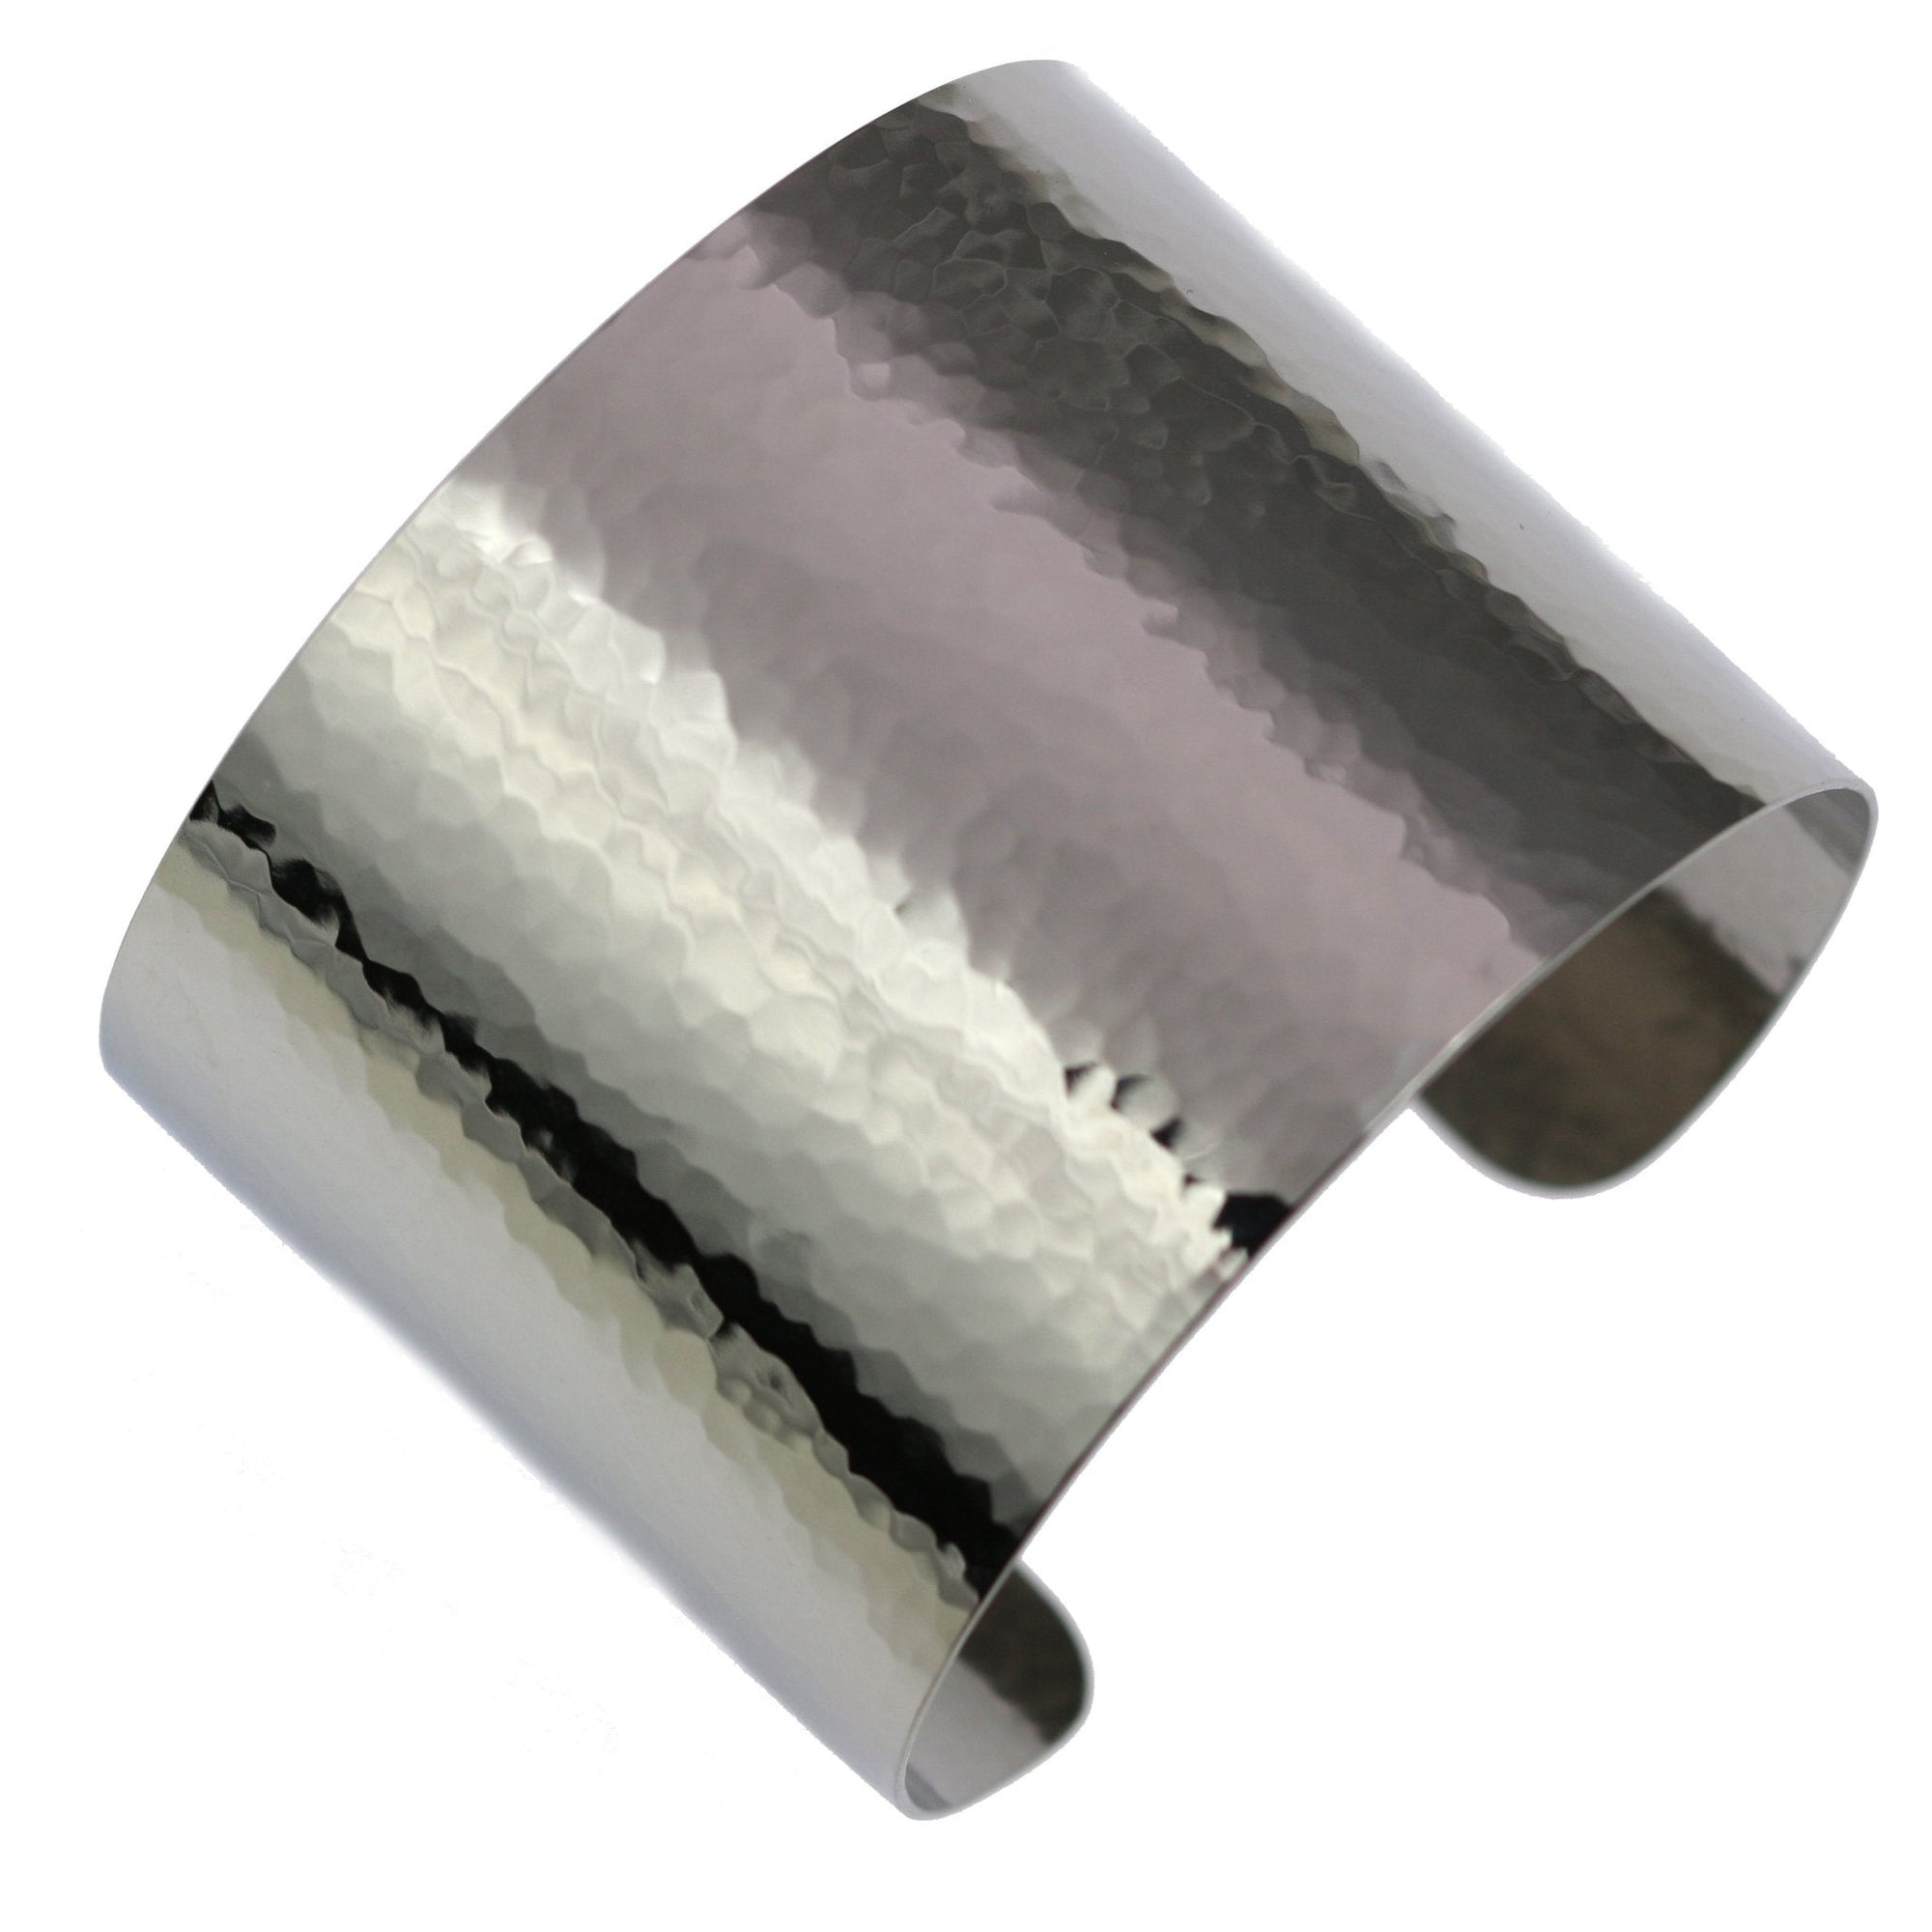 Top - 1 3/4 Inch Wide Hammered Stainless Steel Cuff Bracelet